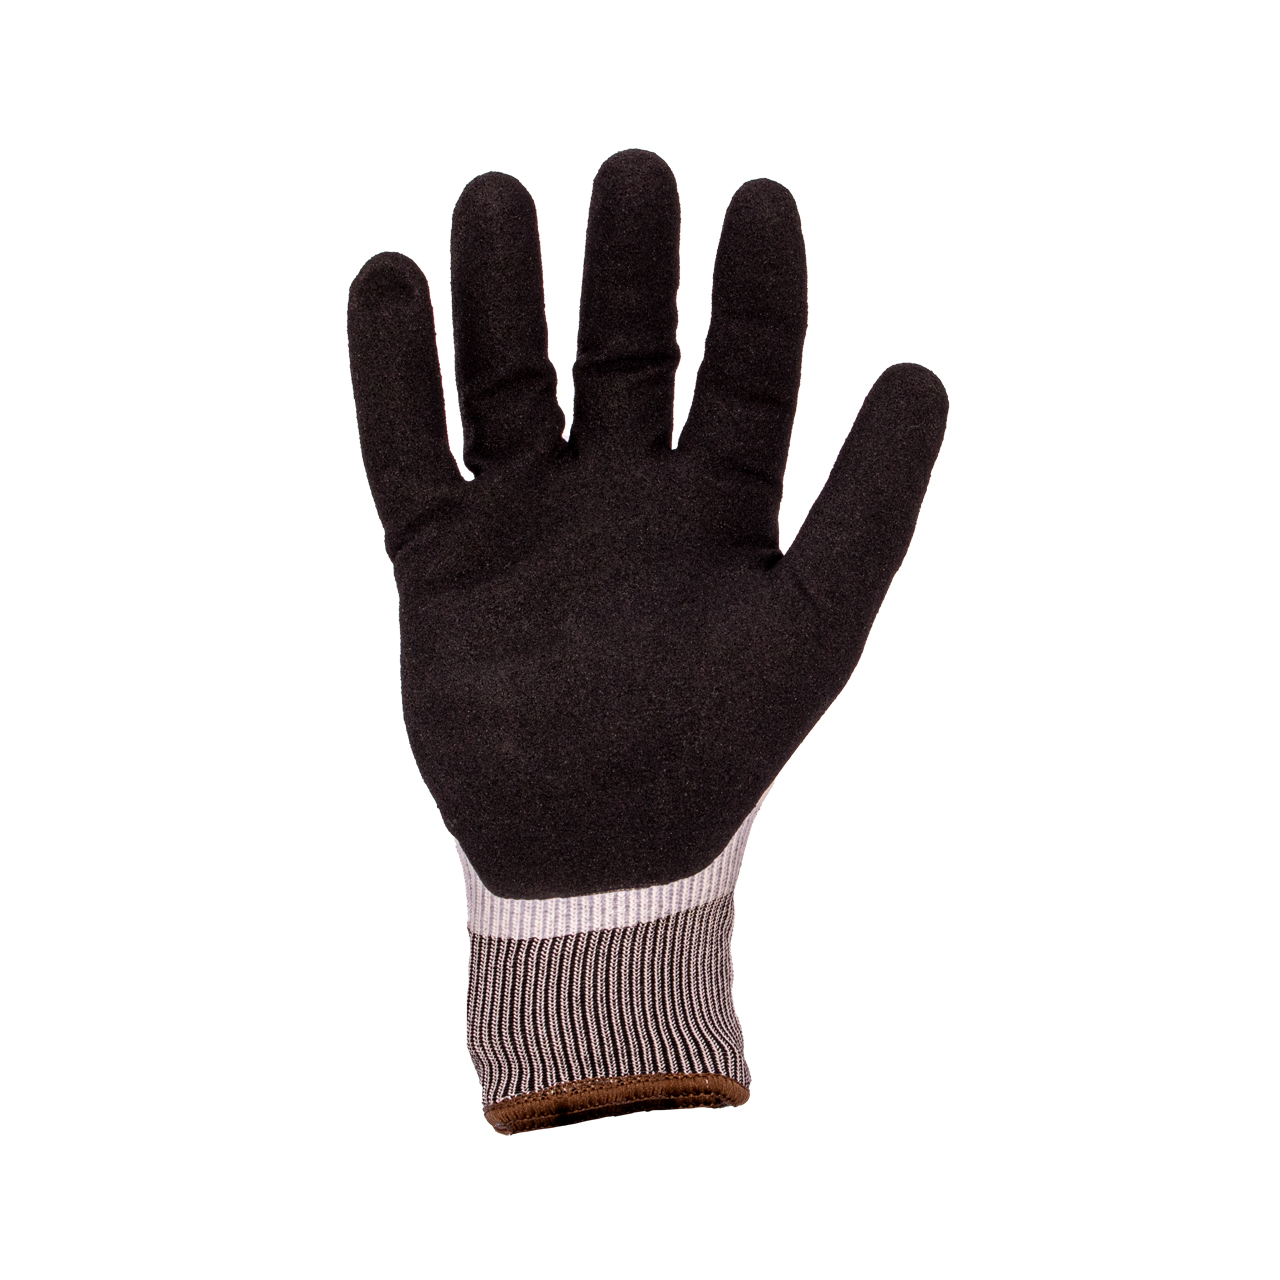 Armour Safety Products Ltd. - Octane Cryo Knit Glove